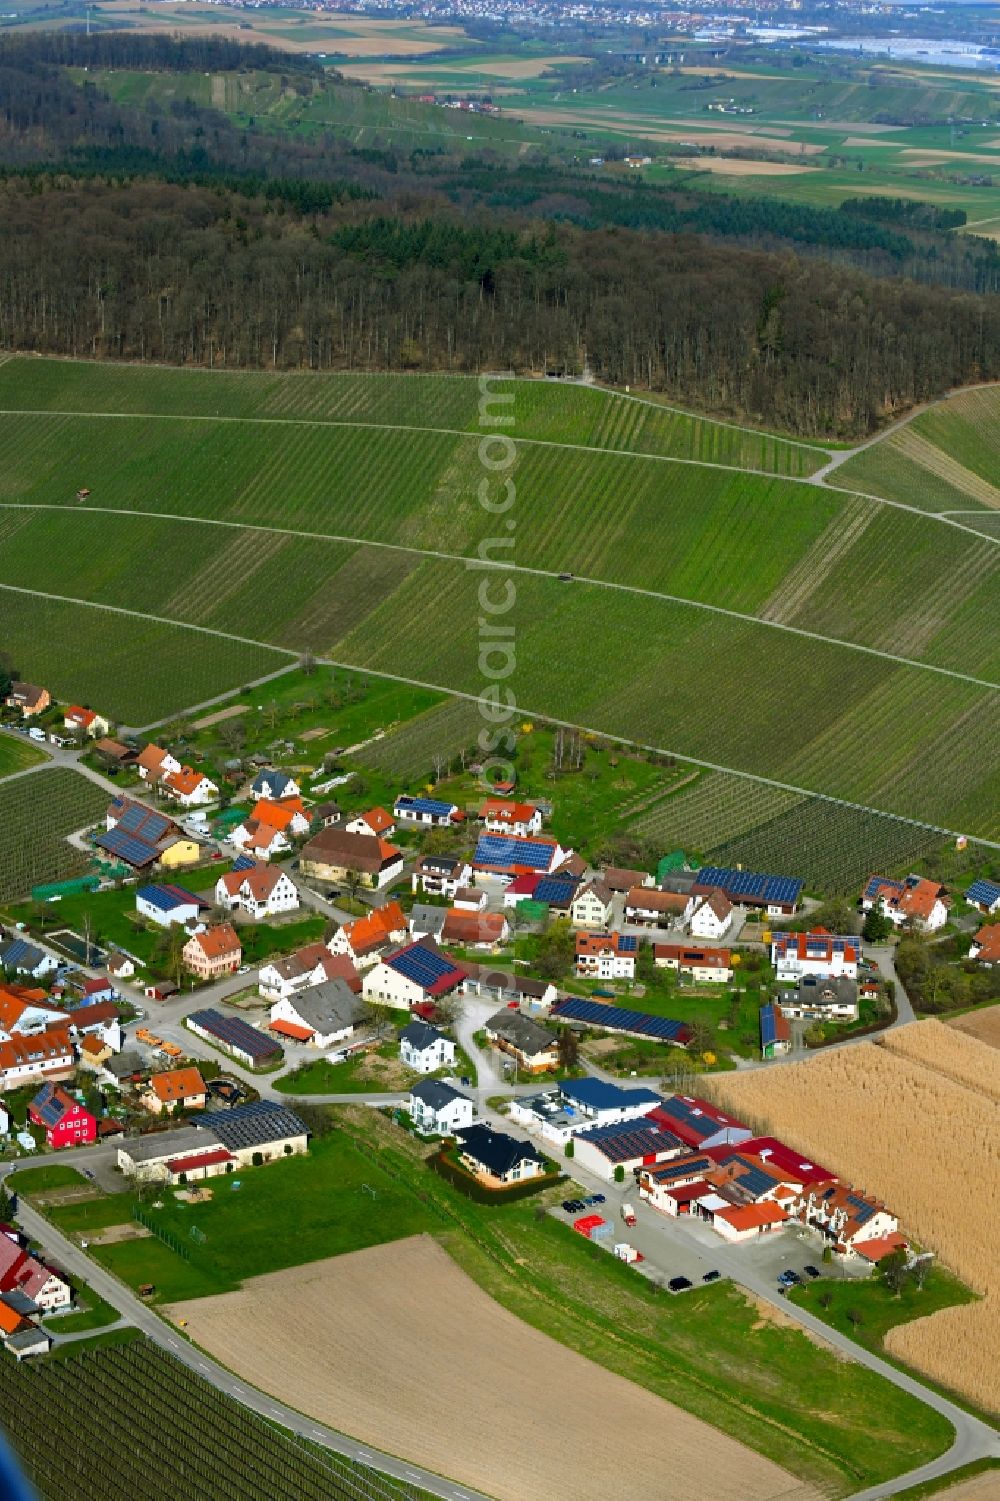 Aerial image Siebeneich - Location view of the streets and houses of residential areas in the valley landscape surrounded by mountains in Siebeneich in the state Baden-Wurttemberg, Germany